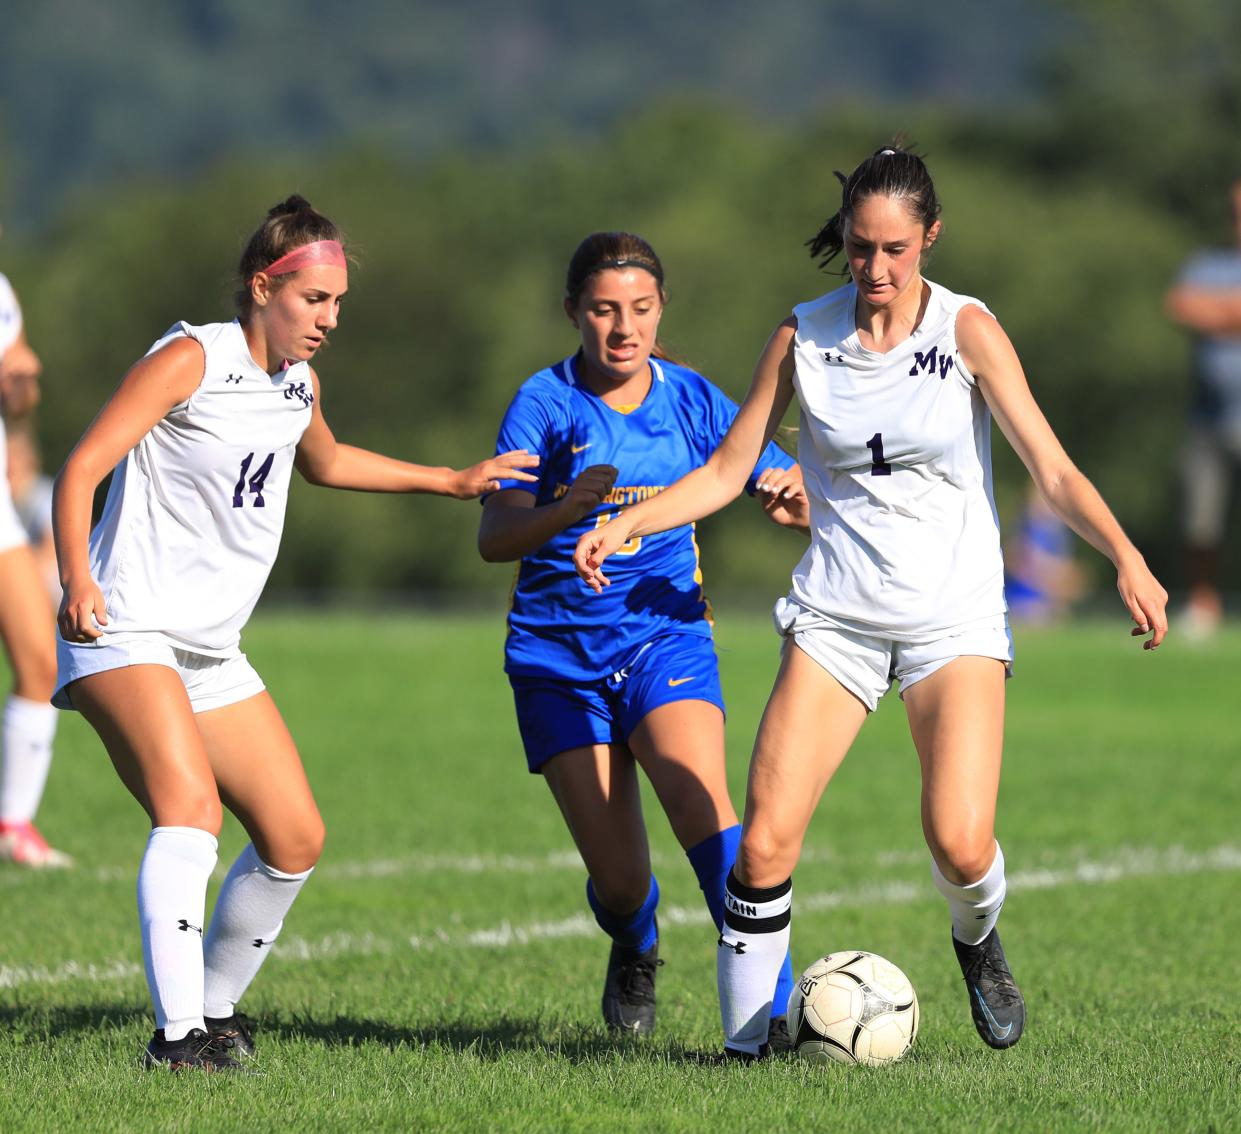 Monroe-Woodbury's Natalie Harwood gets the ball under control ahead of Washingtonville's Nicolette Mammoliti during Wednesday's game on August 30, 2023.